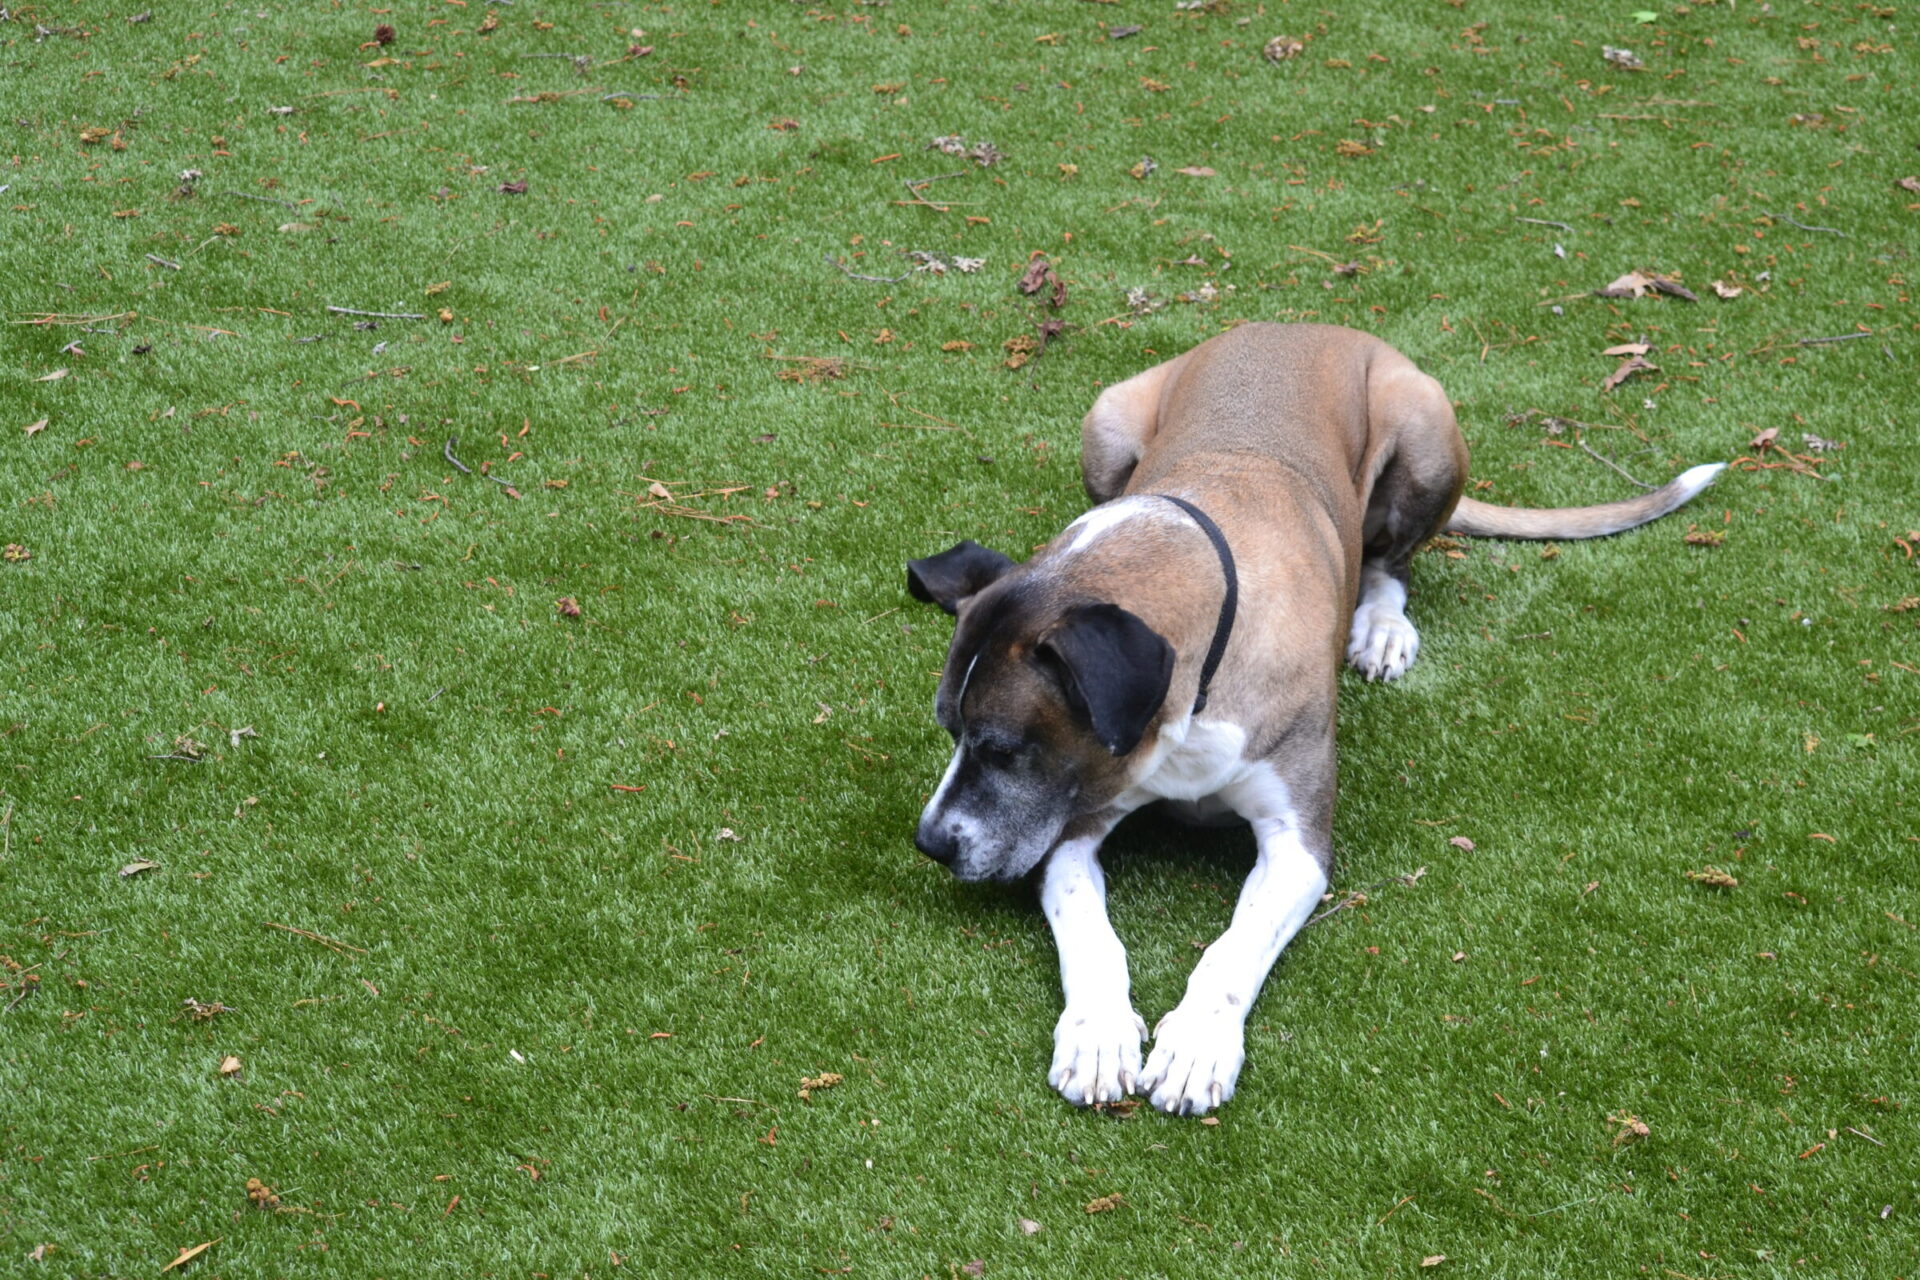 A brown and white dog is lying on a green lawn strewn with a few fallen leaves, looking off to the side.